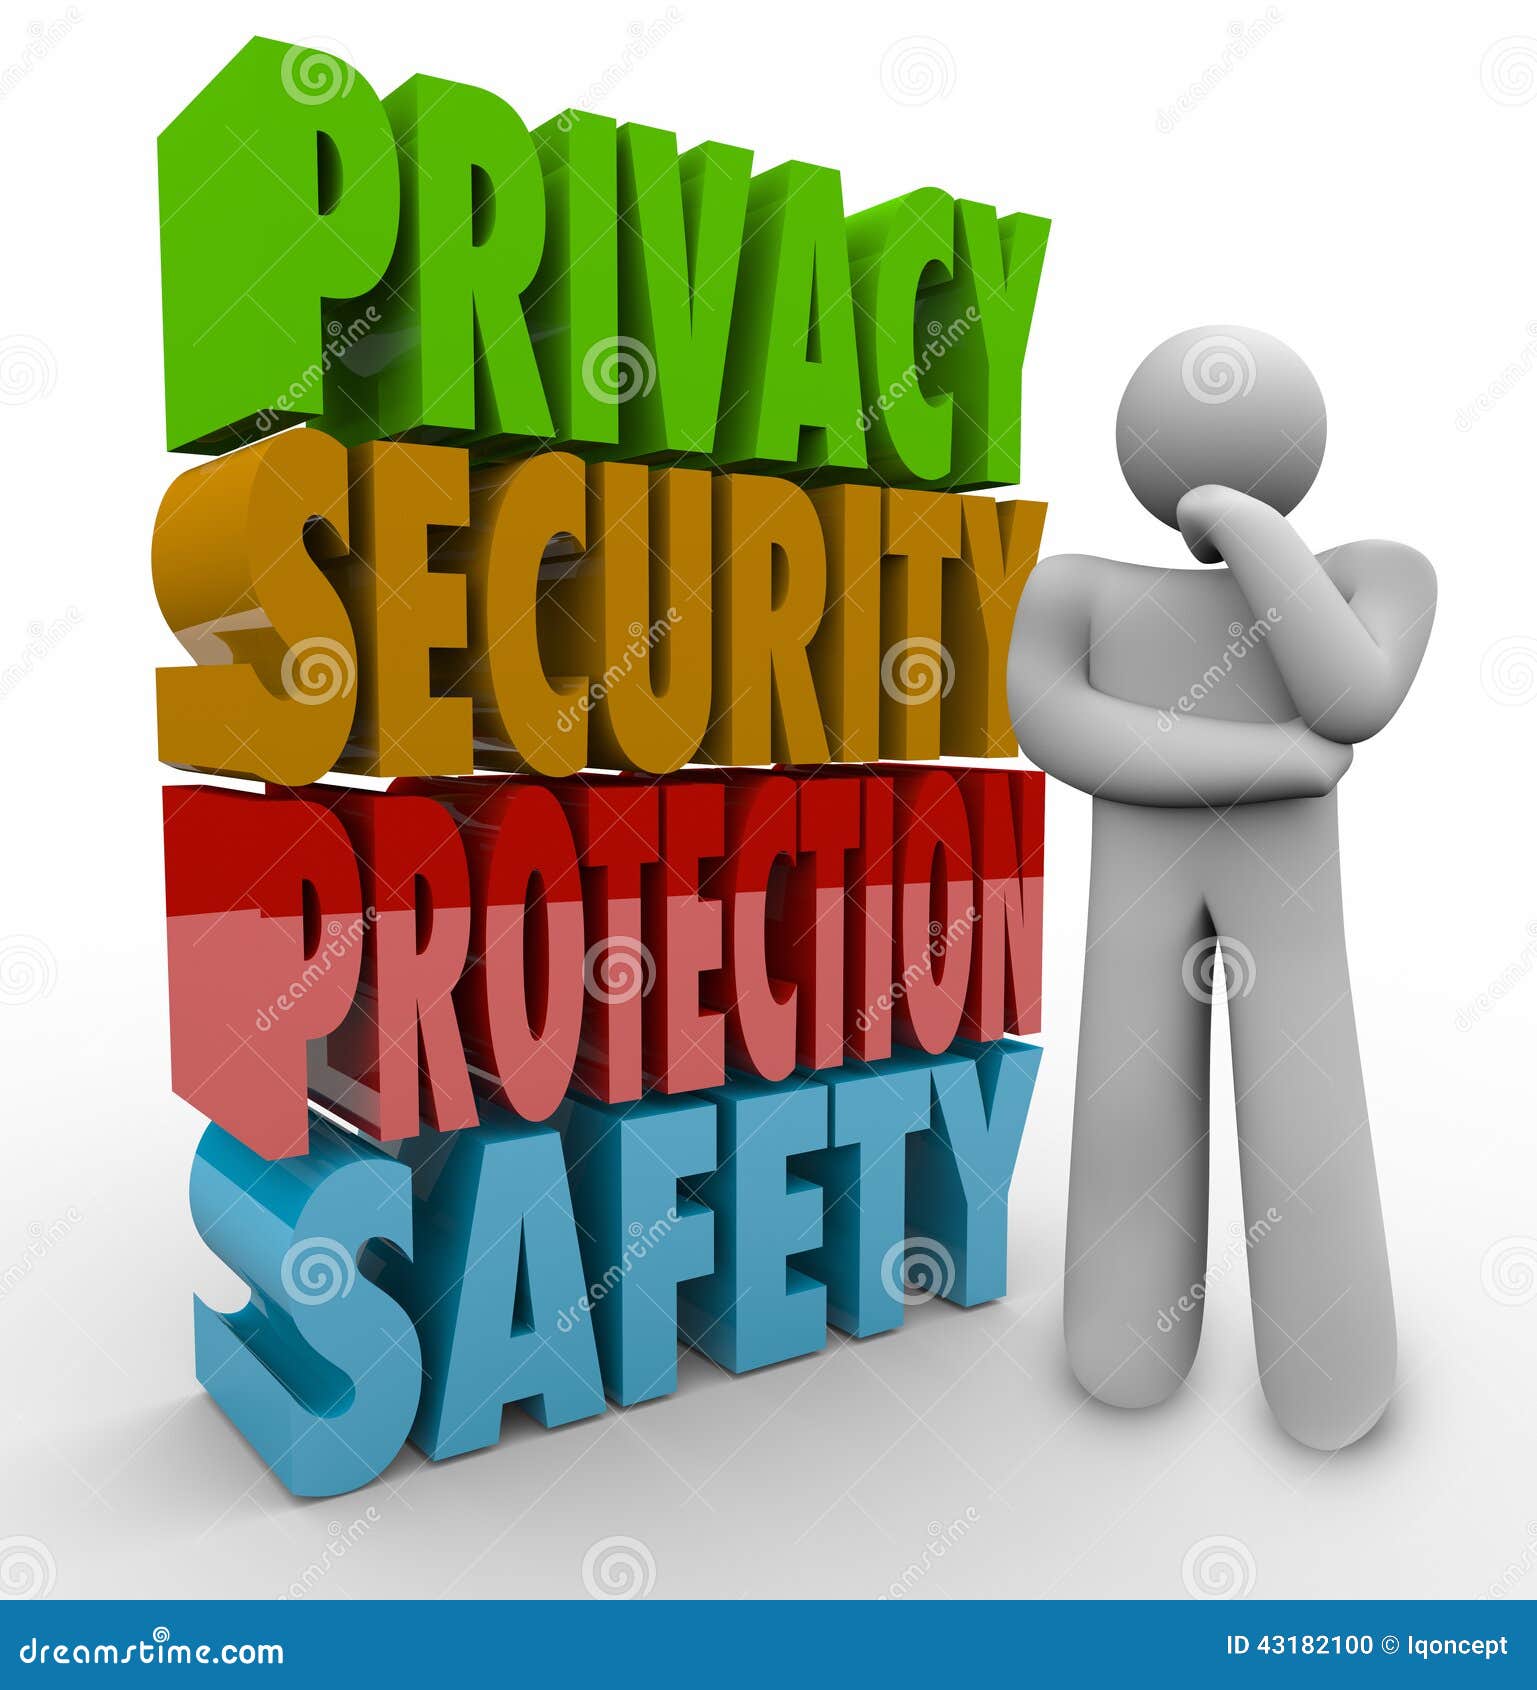 clipart information security - photo #3